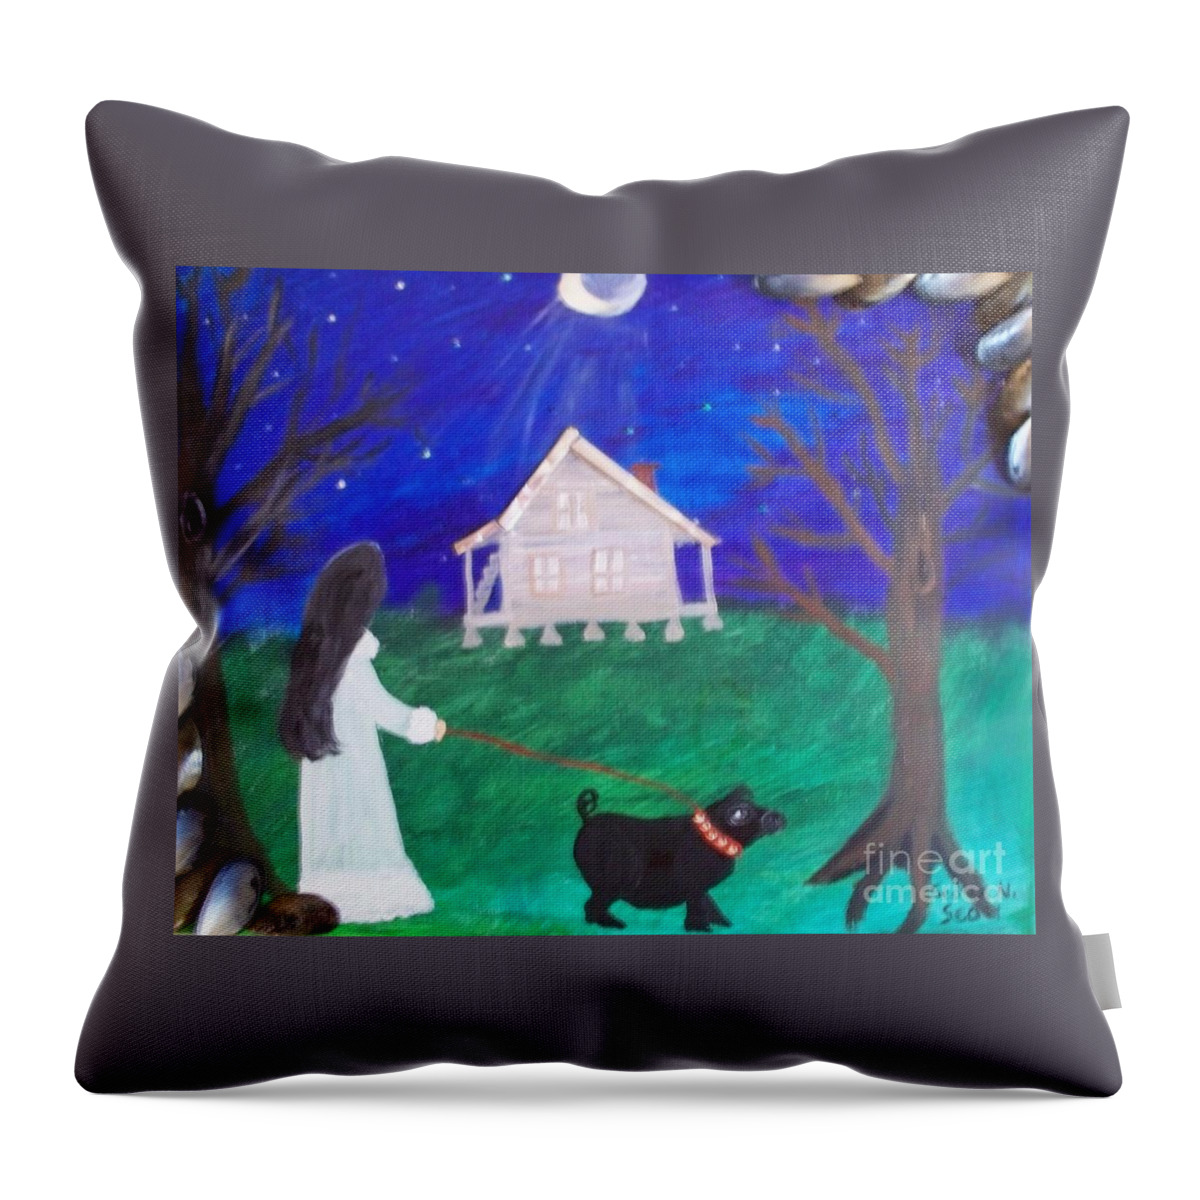 Midnight Stroll Throw Pillow featuring the painting Midnight Stroll by Seaux-N-Seau Soileau